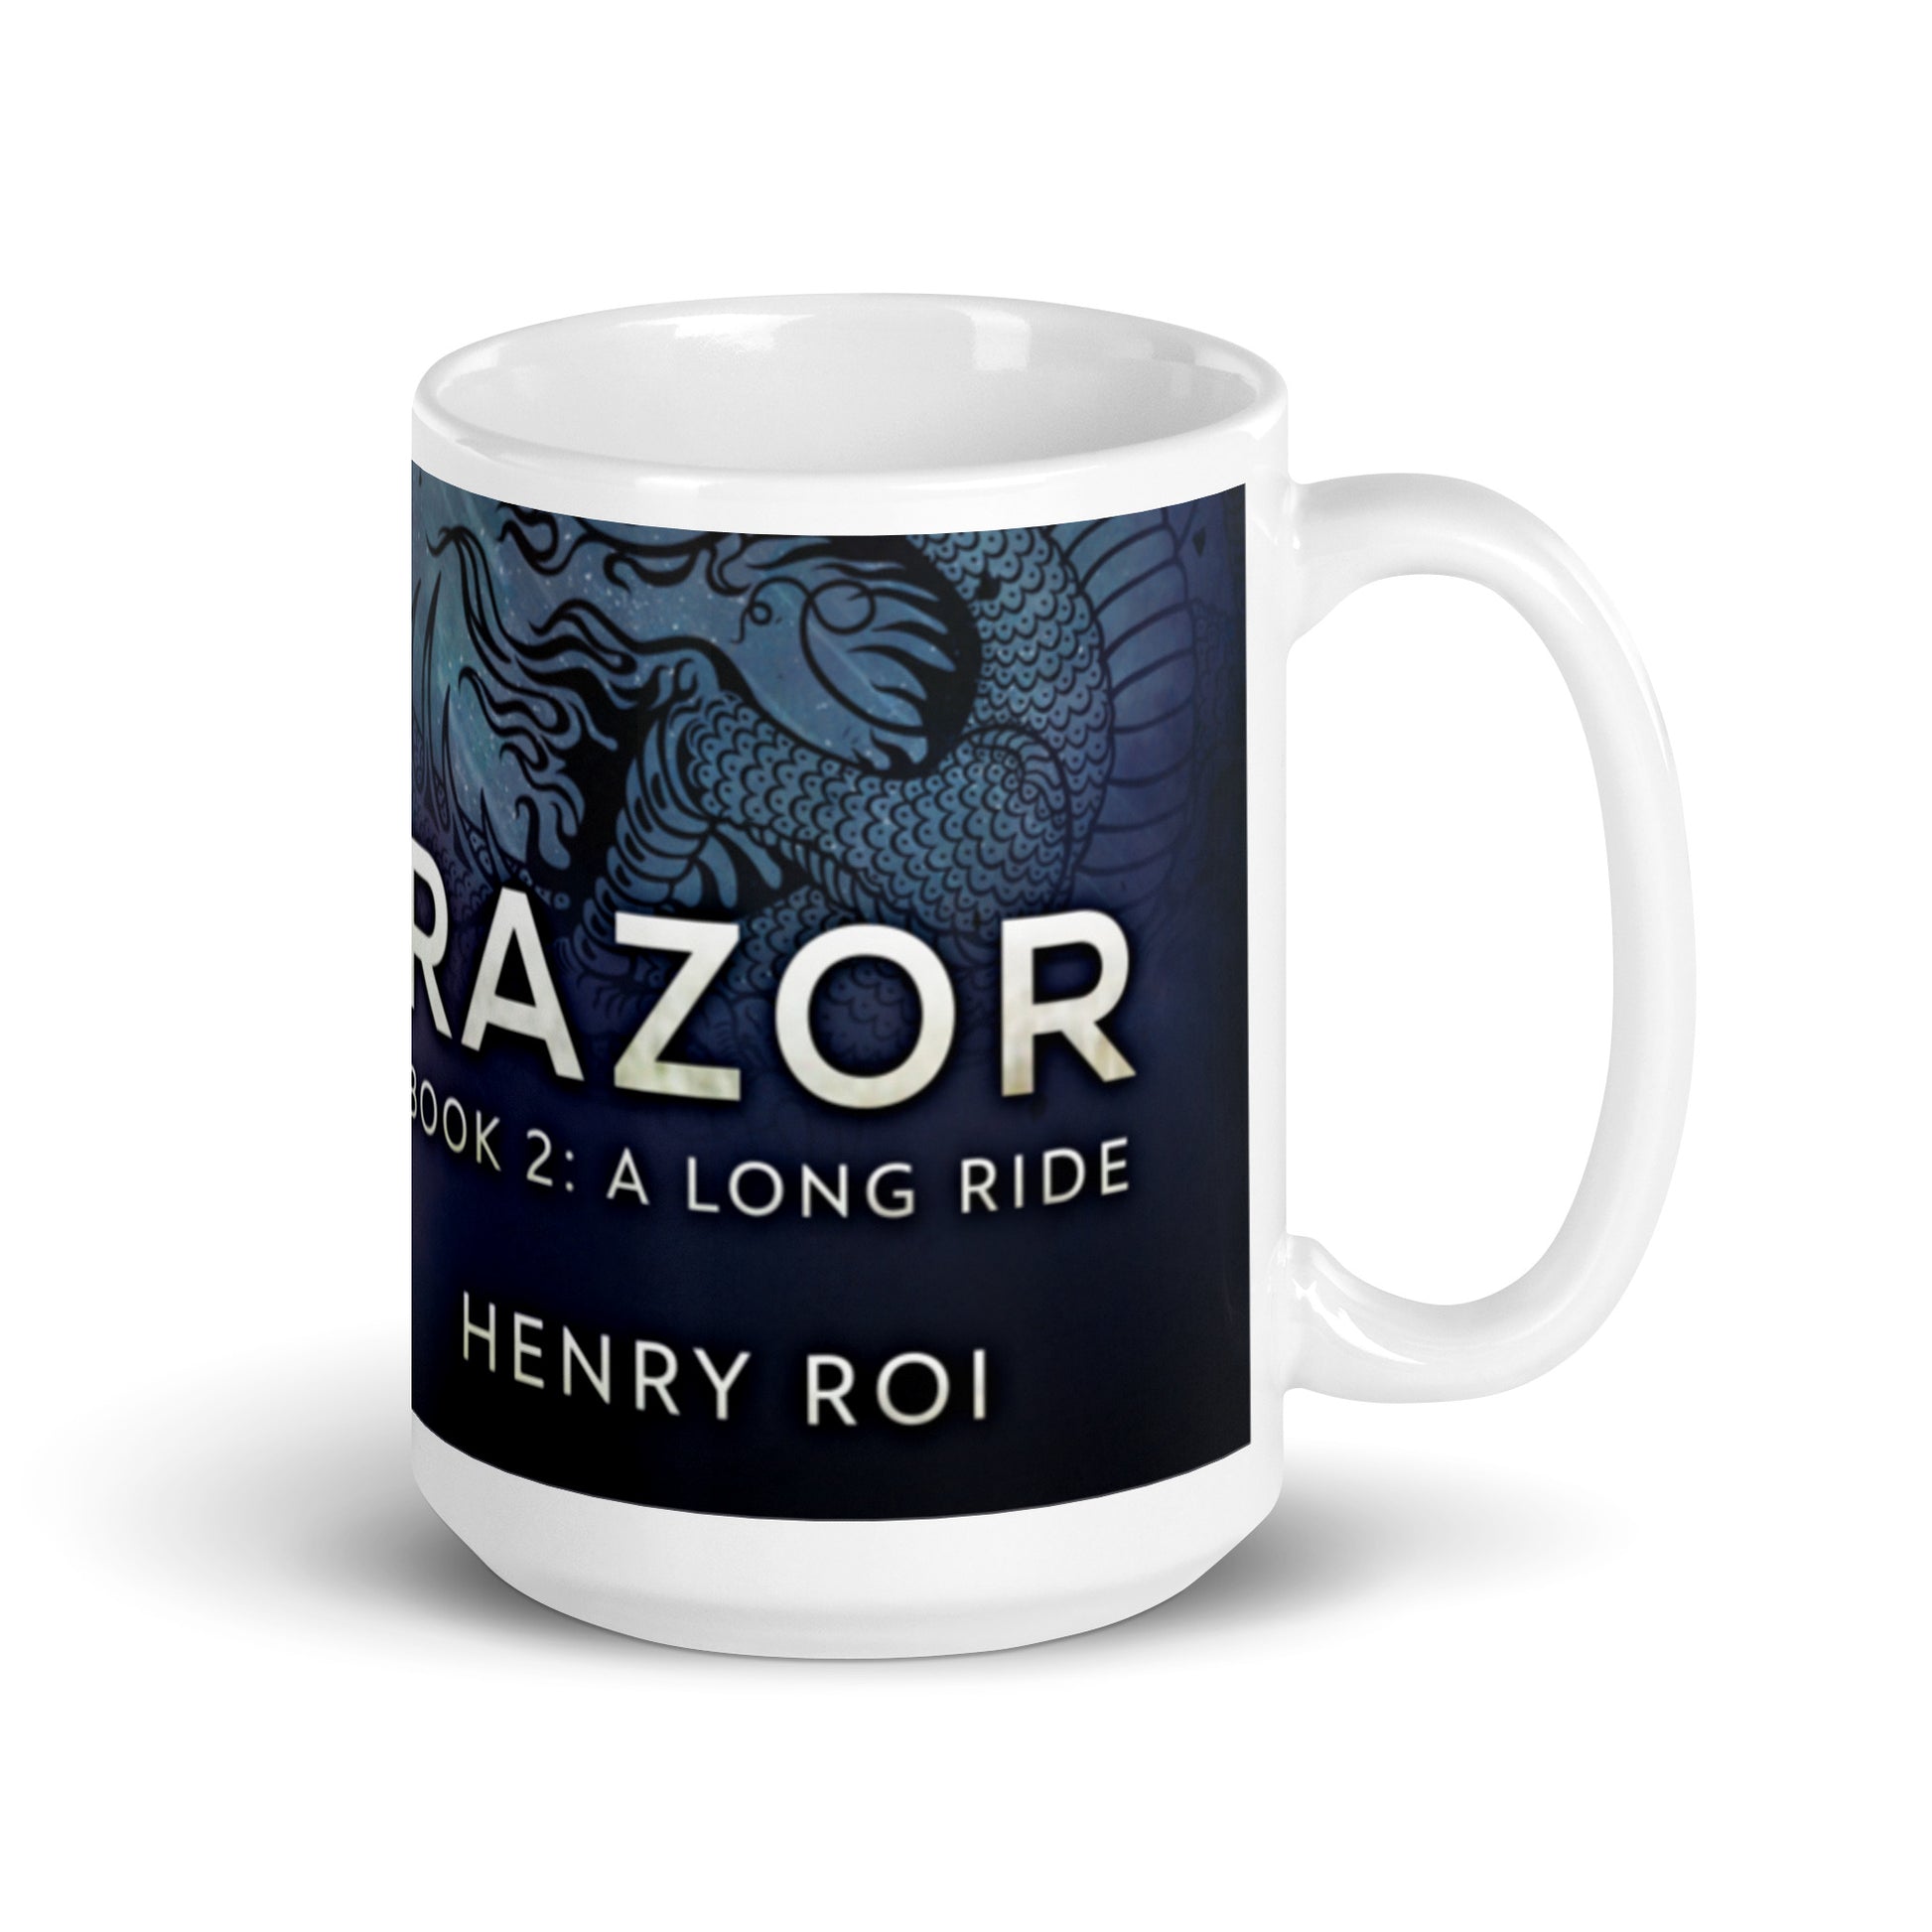 white coffee mug with cover art from Henry Roi's book A Long Ride